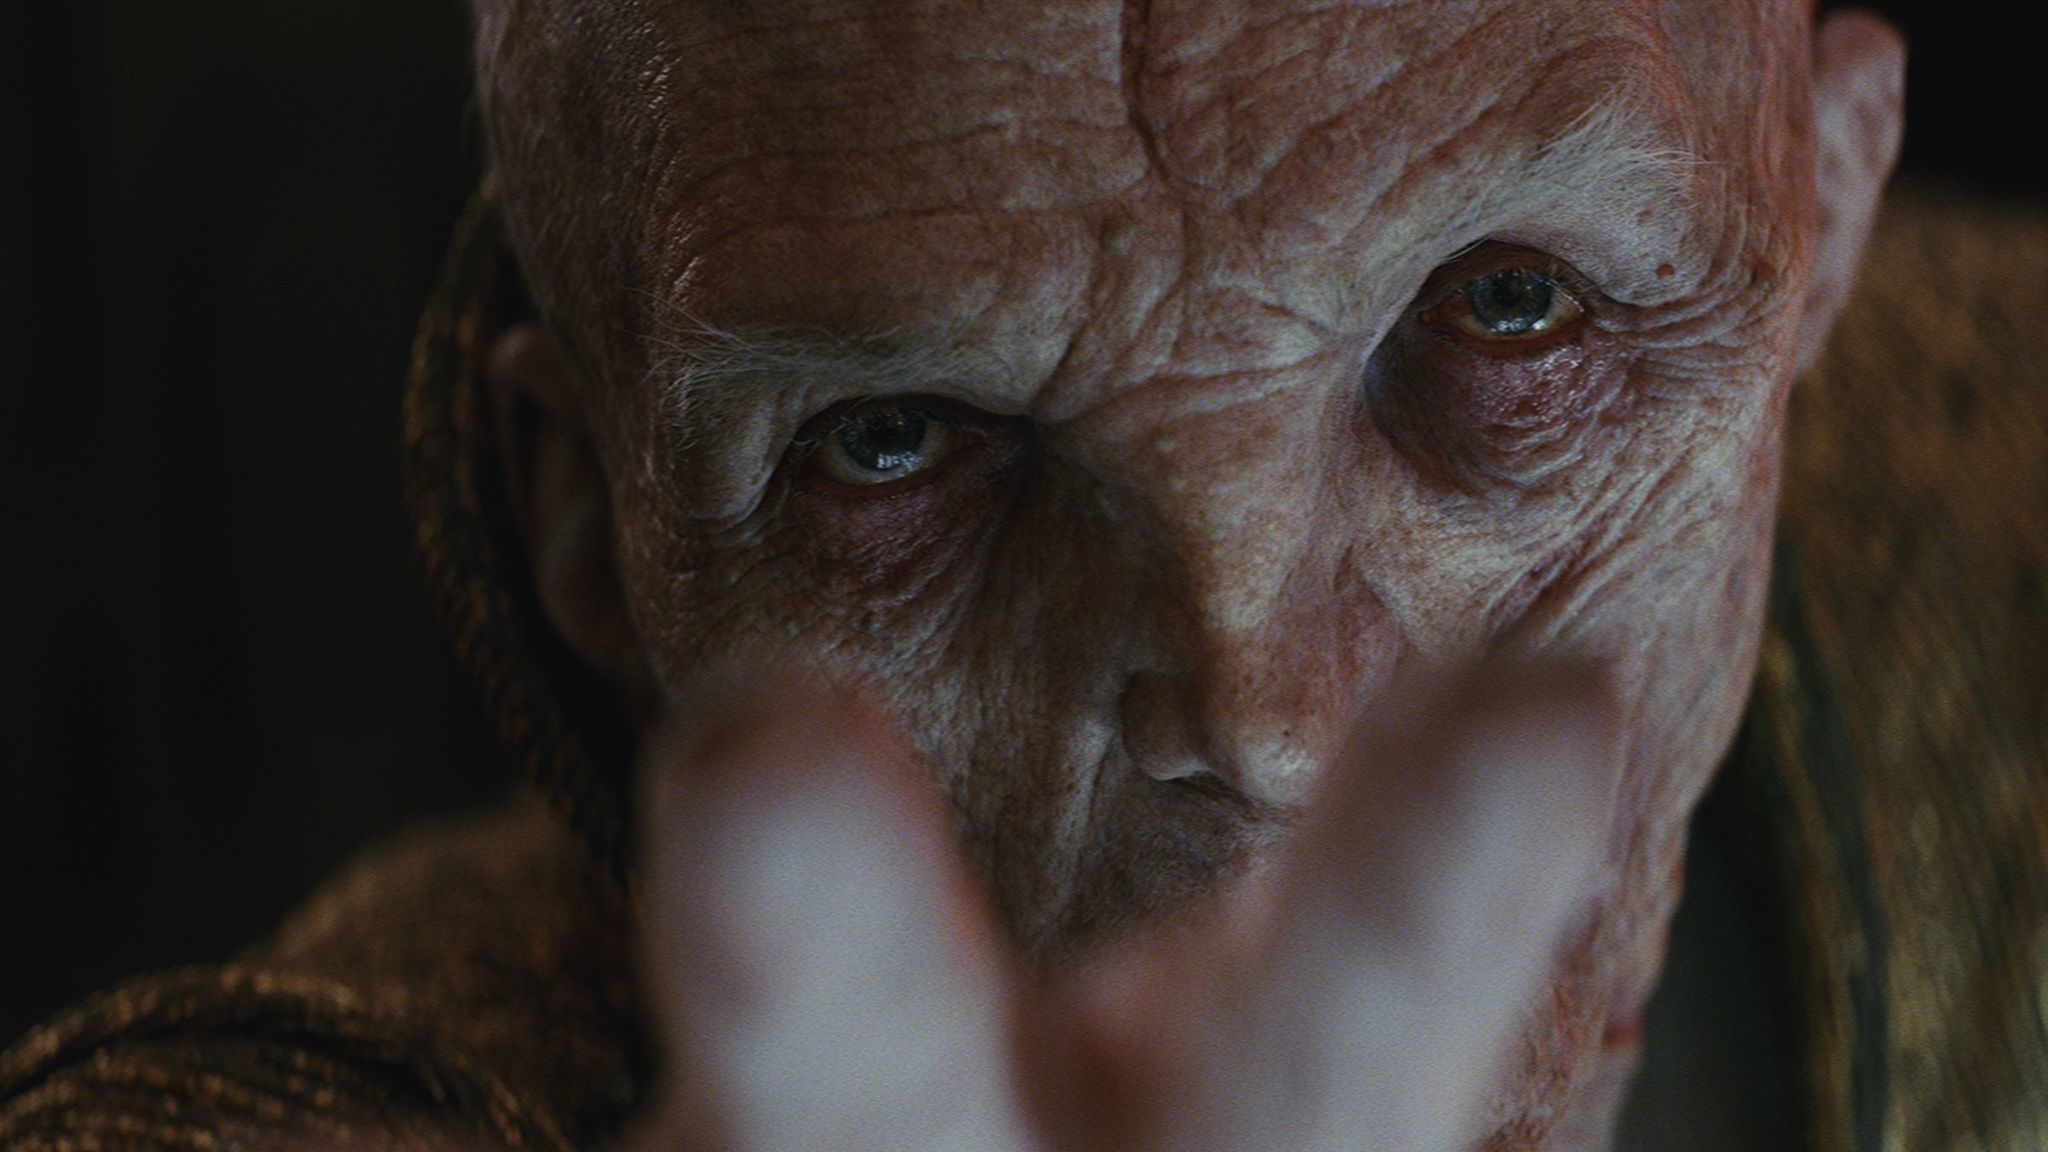 13 characters you need to know before seeing 'Star Wars: The Last